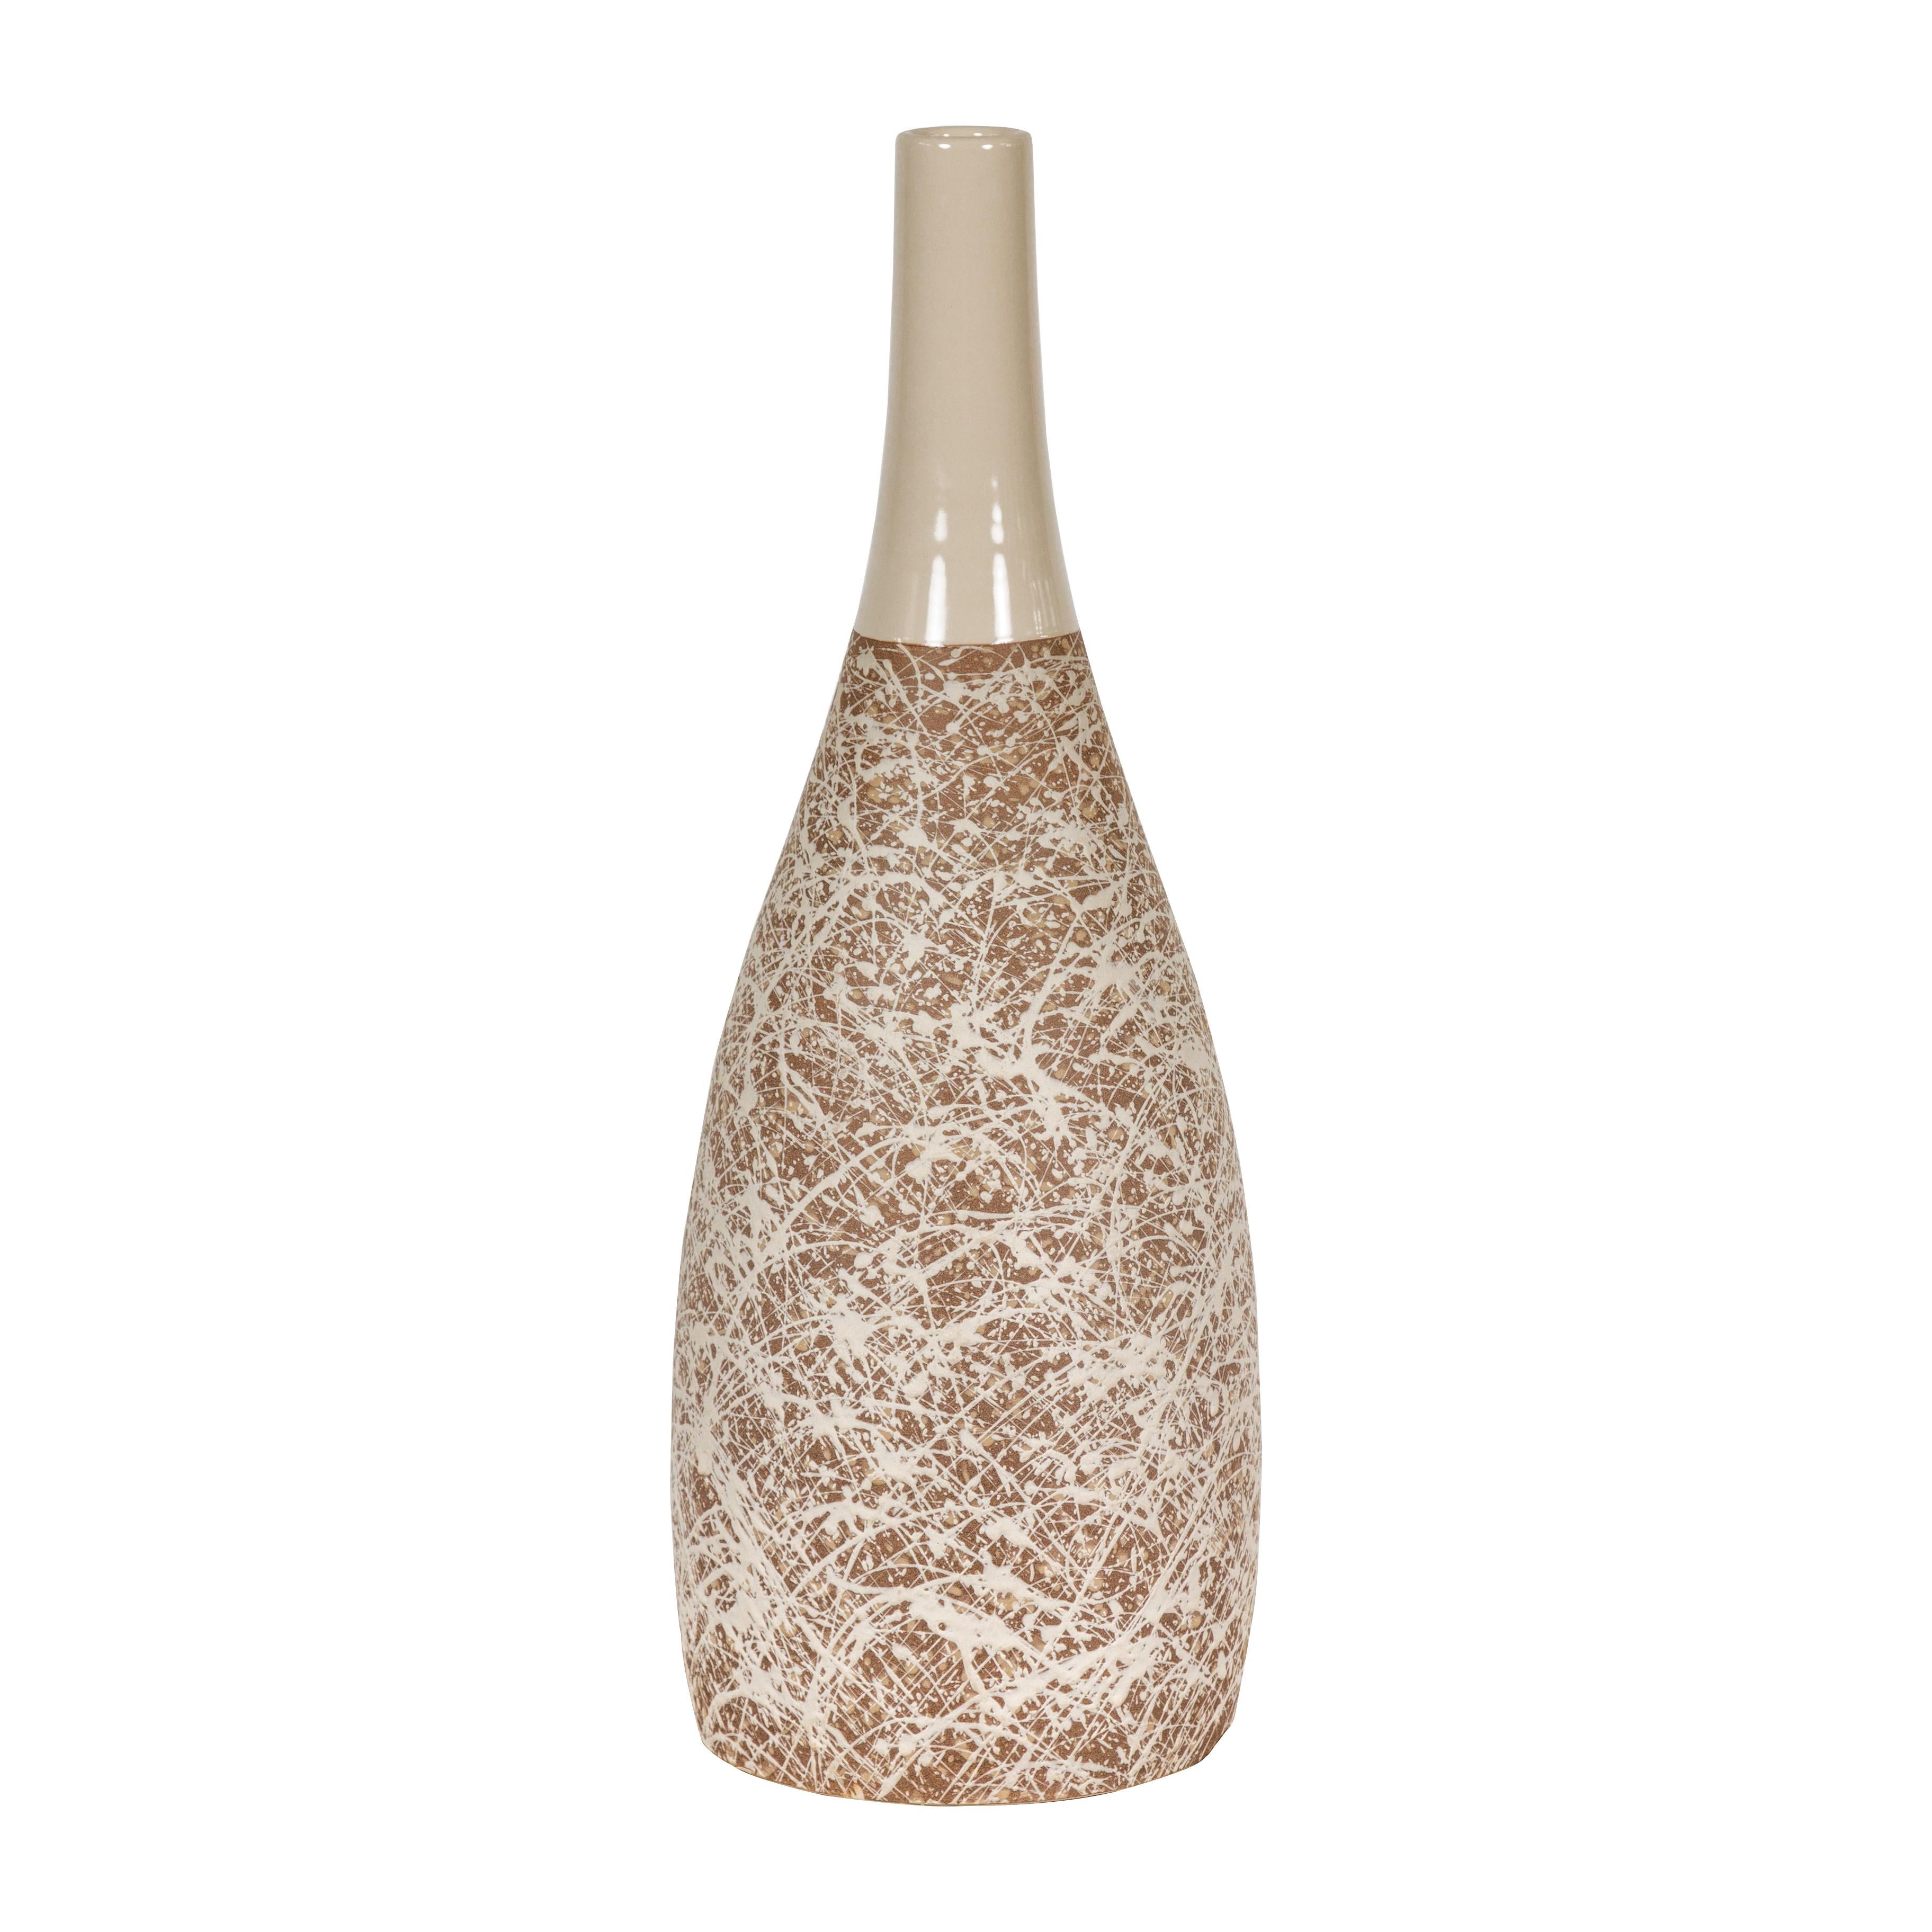 Hand-Crafted Artisan Bottle Shaped Brown and Cream Ceramic Vase with Dripping For Sale 8